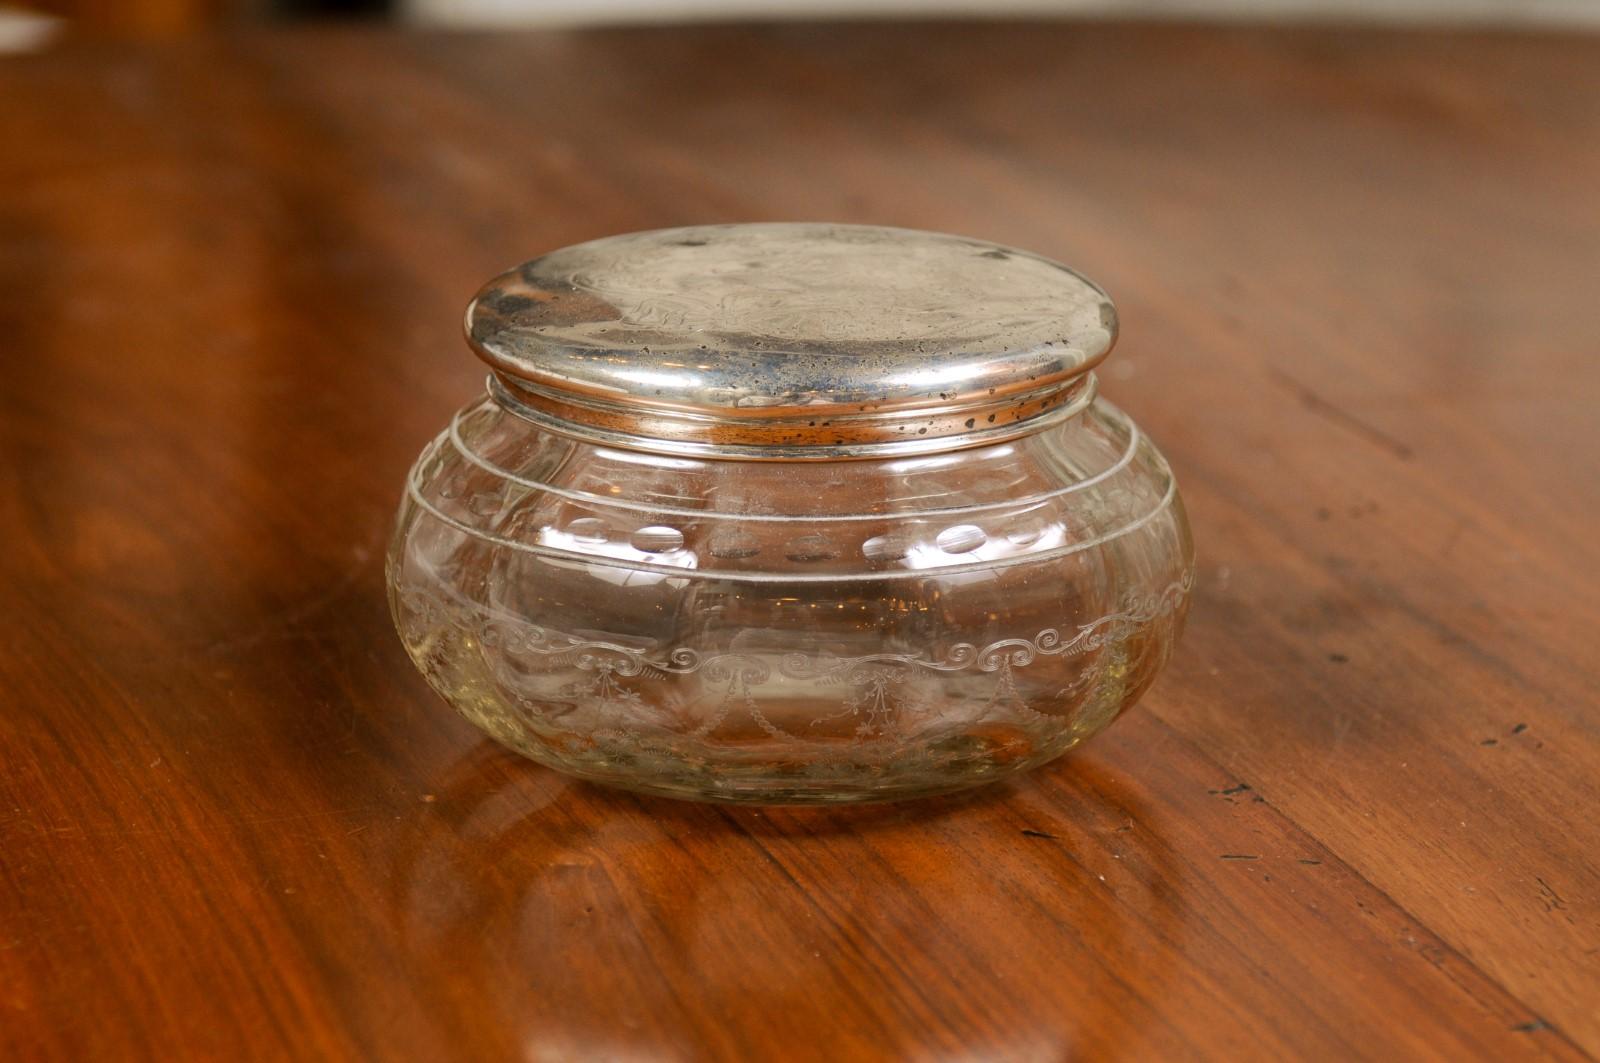 A small English Victorian period glass vanity jar container from the 19th century, with incised silver lid and etched design. Created in England during the reign of Queen Victoria, this petite jar features a circular glass body adorned with a